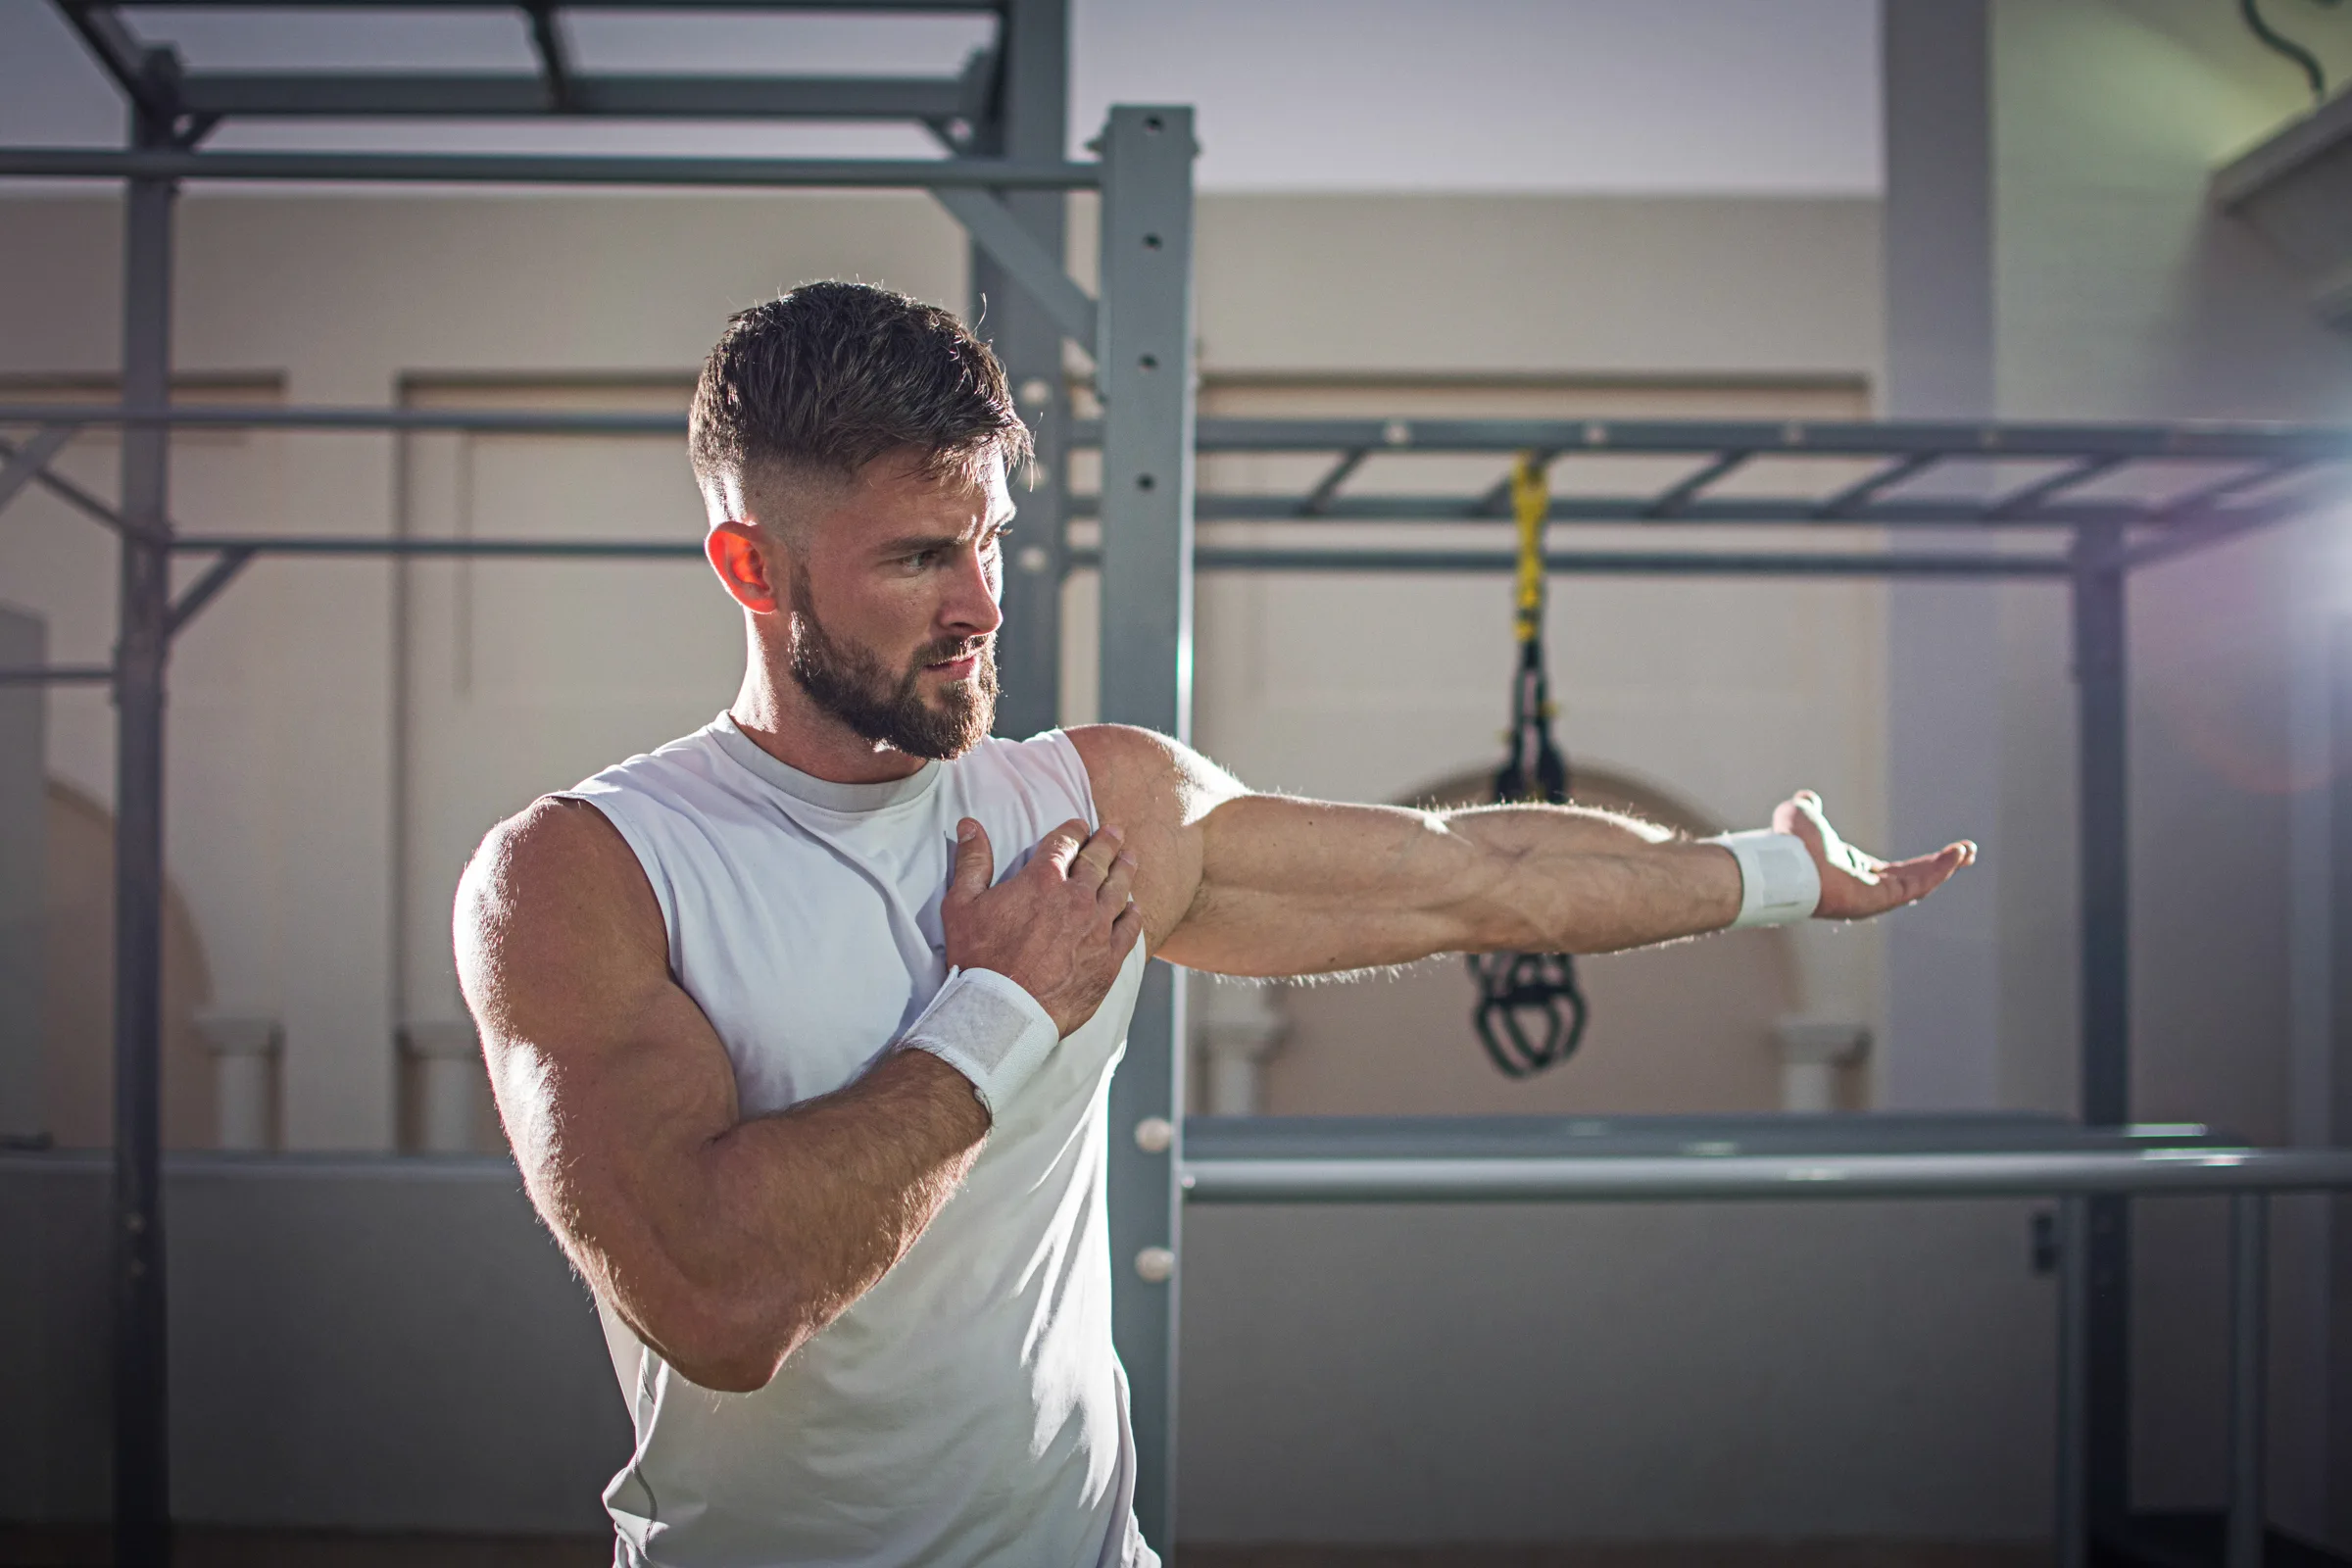 3 Common Training Cues Ruining Your Shoulder Health